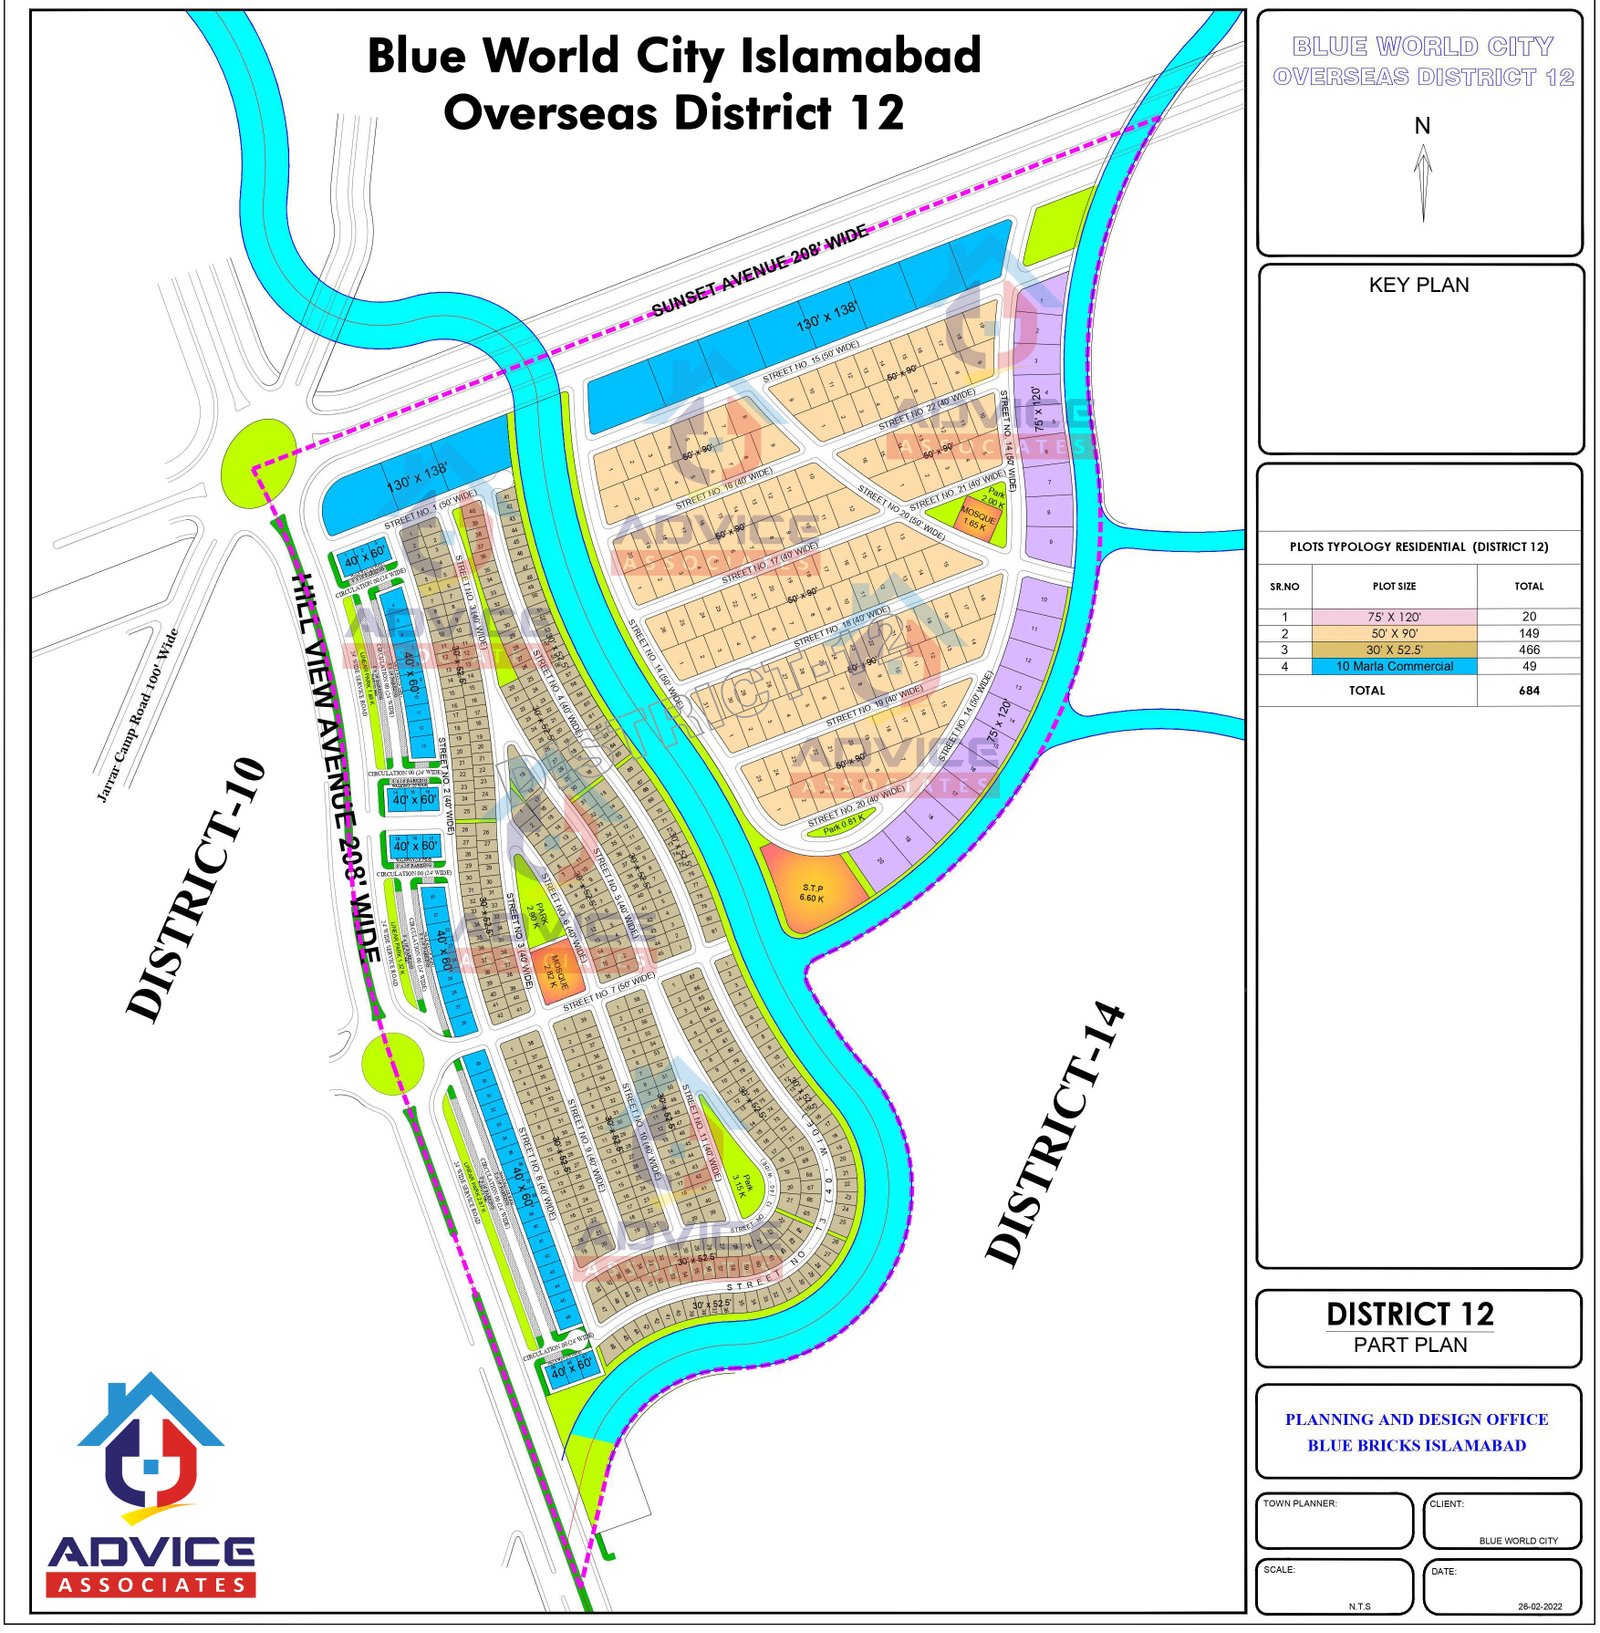 BWC Overseas District 12 Map